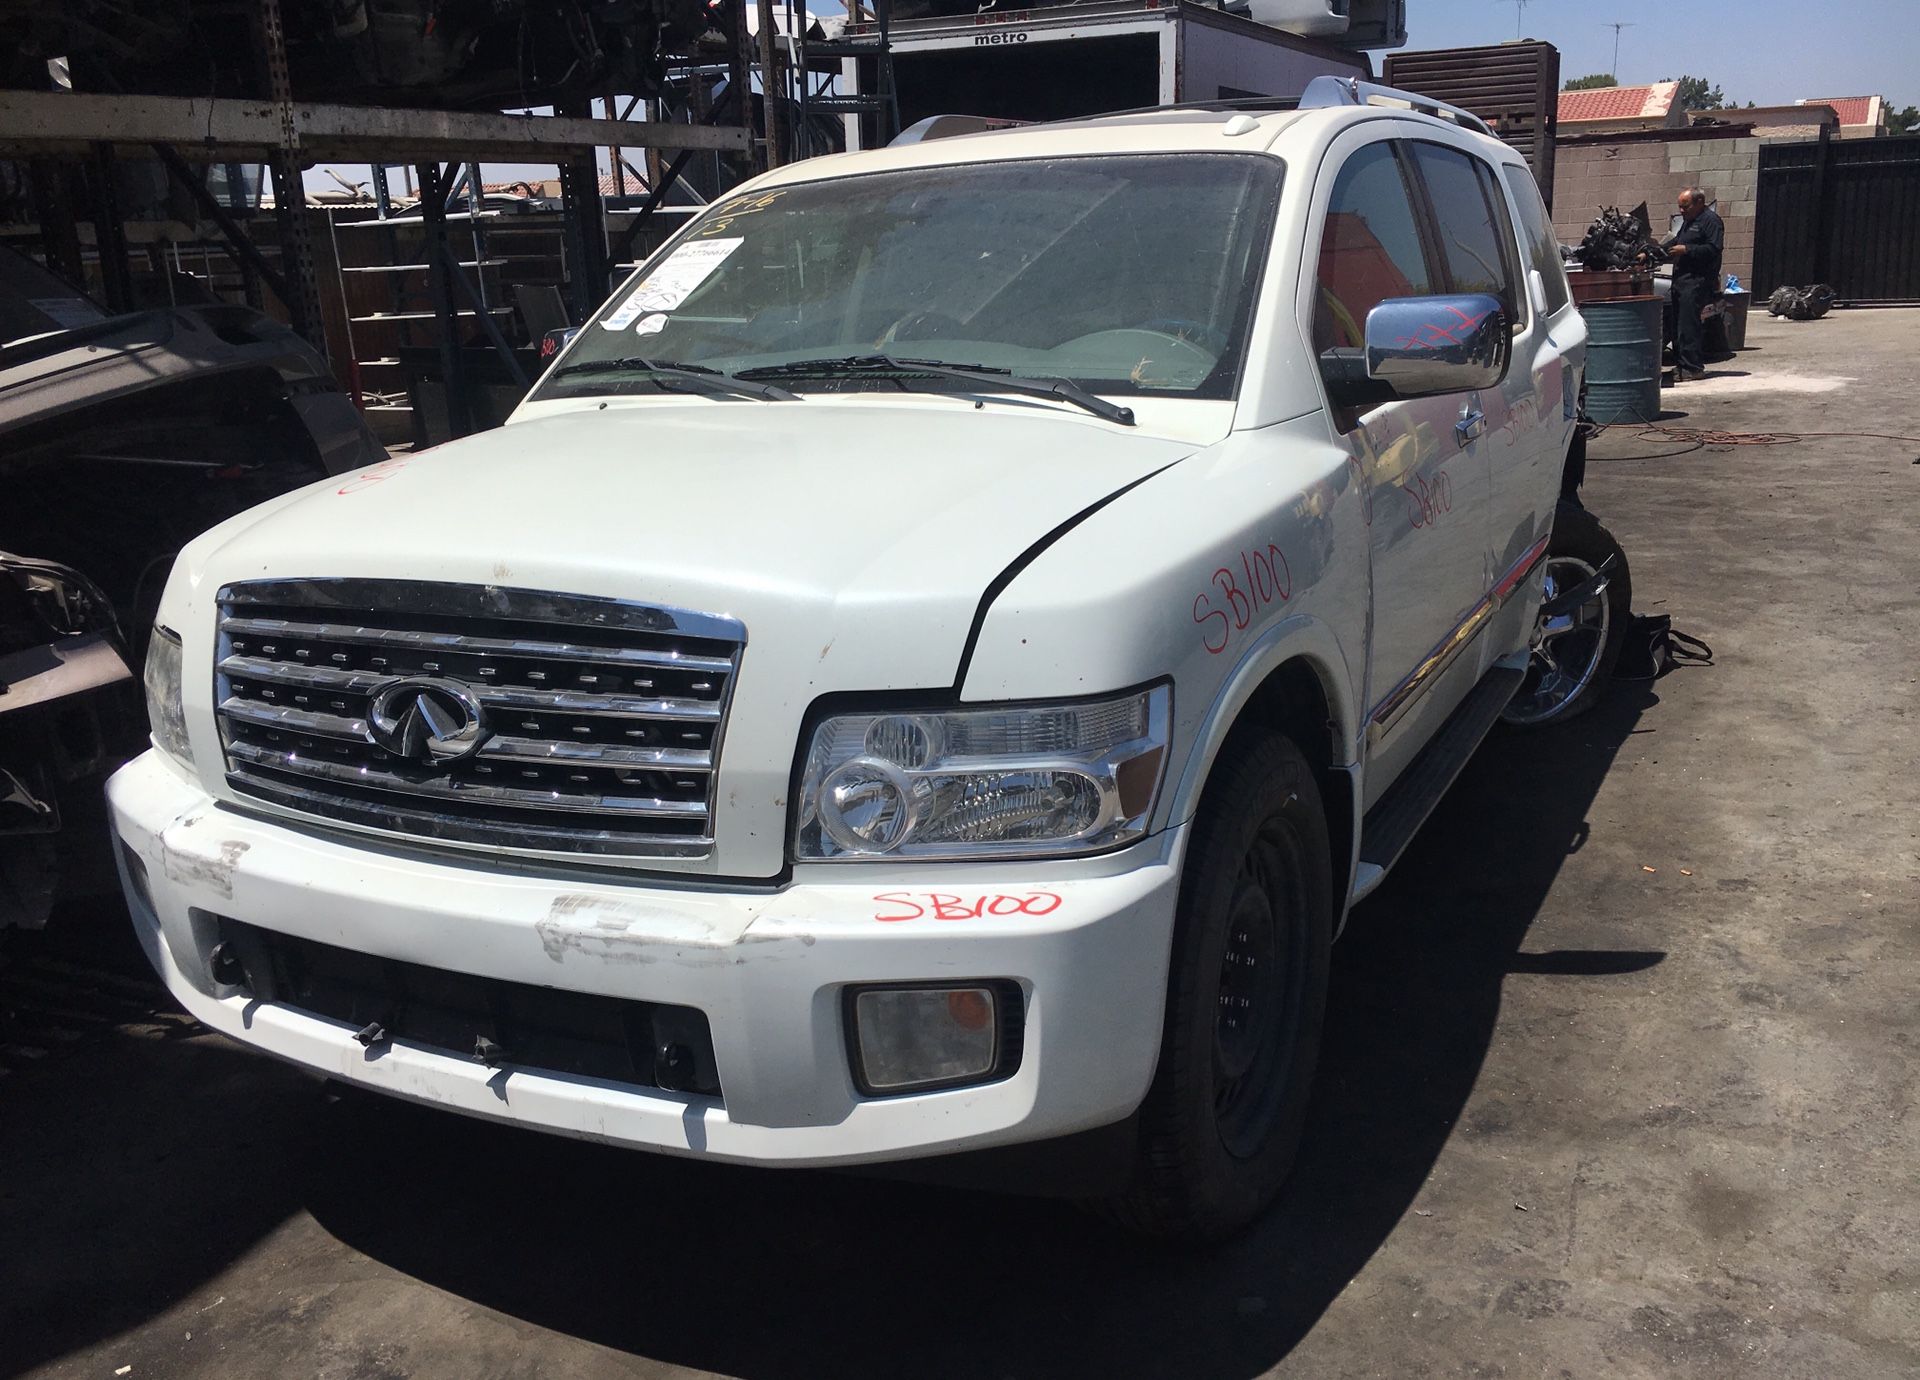 2008 Infiniti QX56 PARTING OUT FOR PARTS